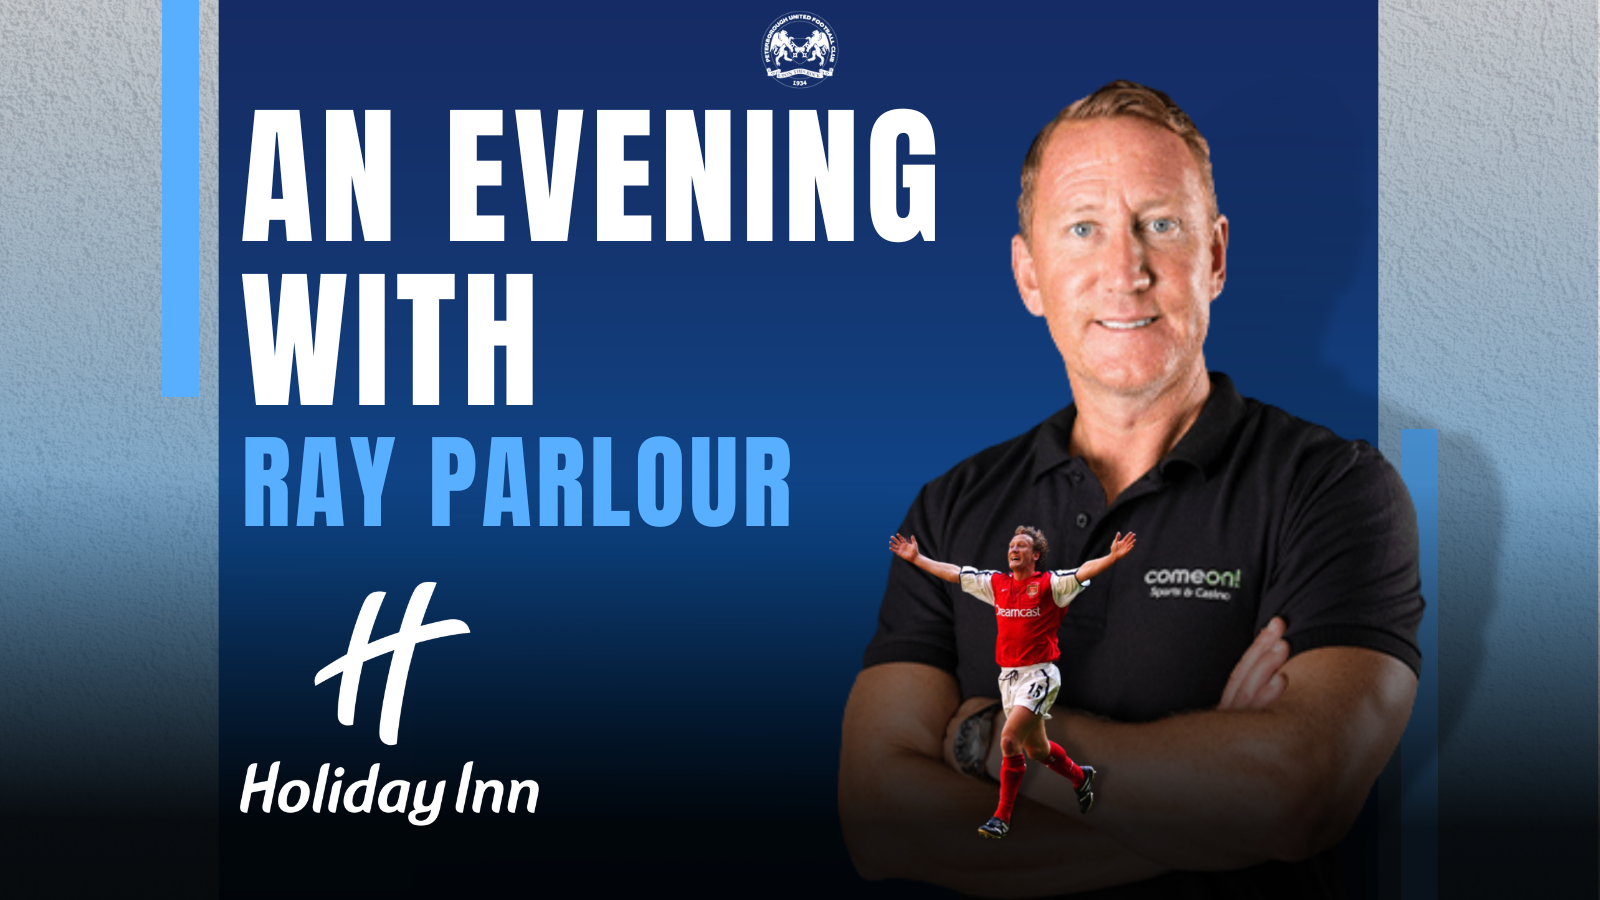 An evening with ray parlour